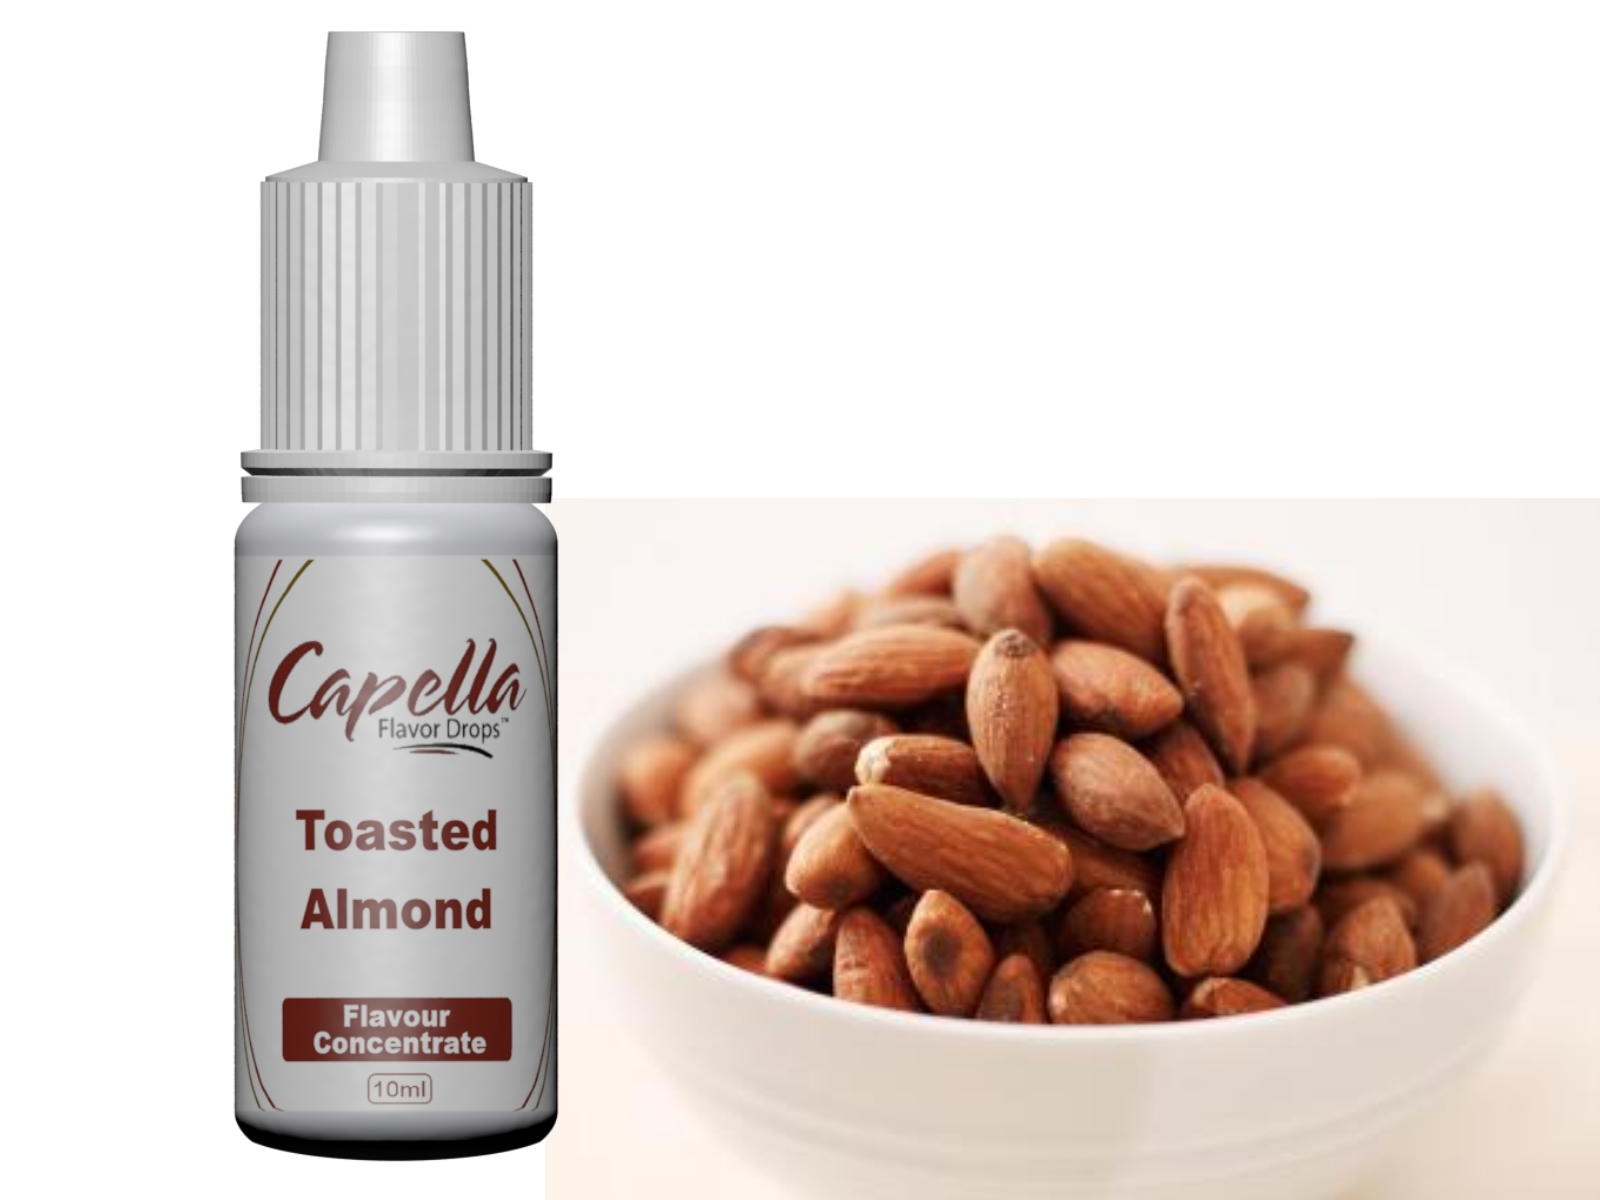 Capella Toasted Almond Flavour